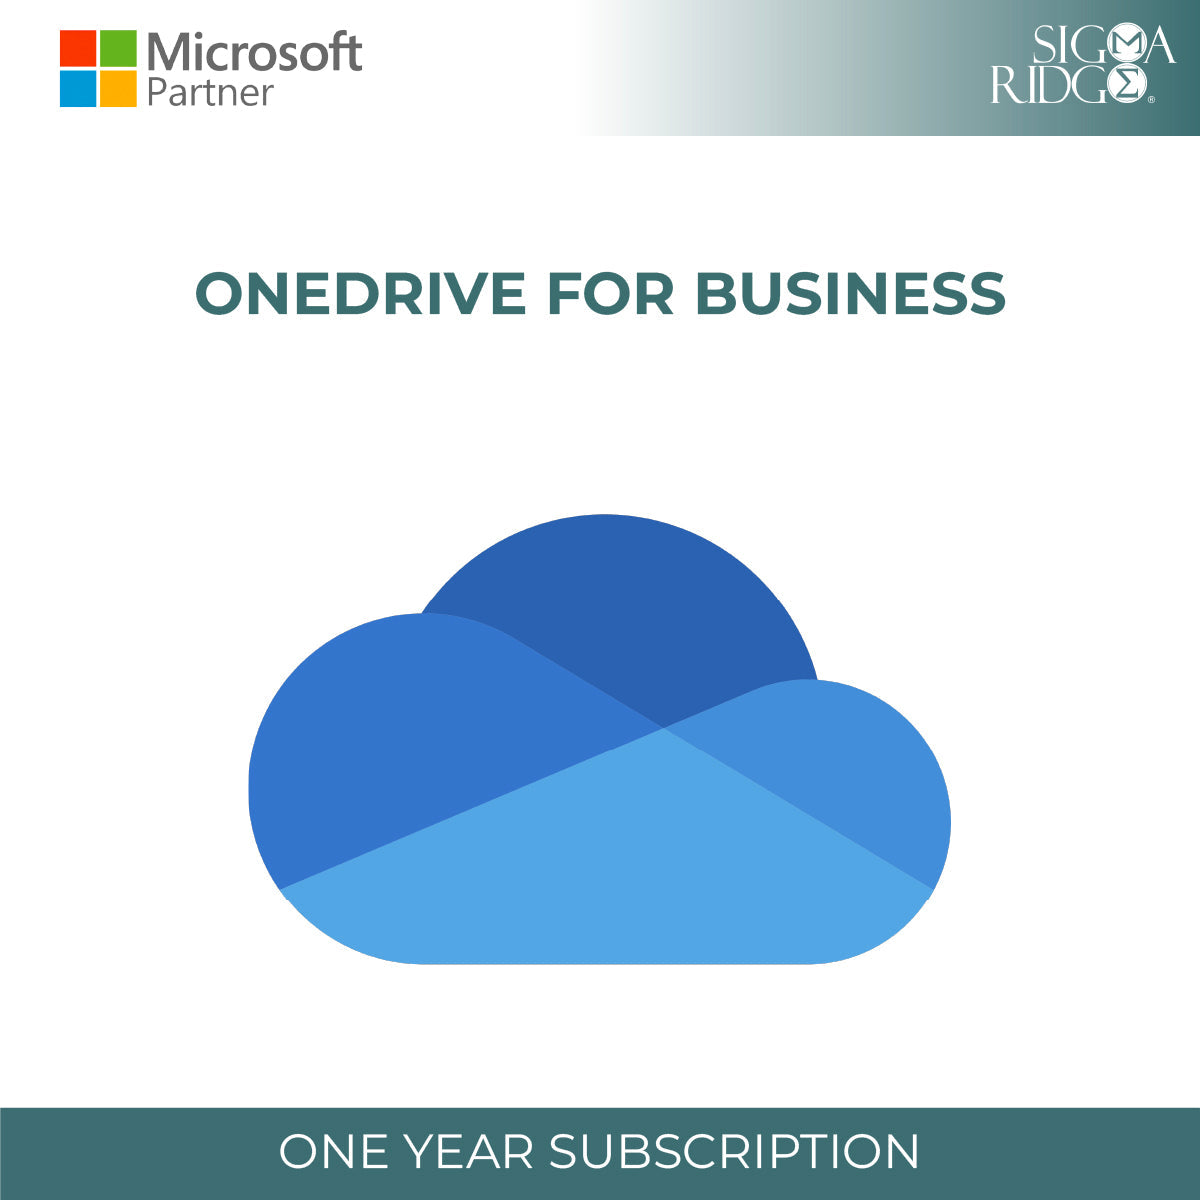 OneDrive for business (Plan 2)